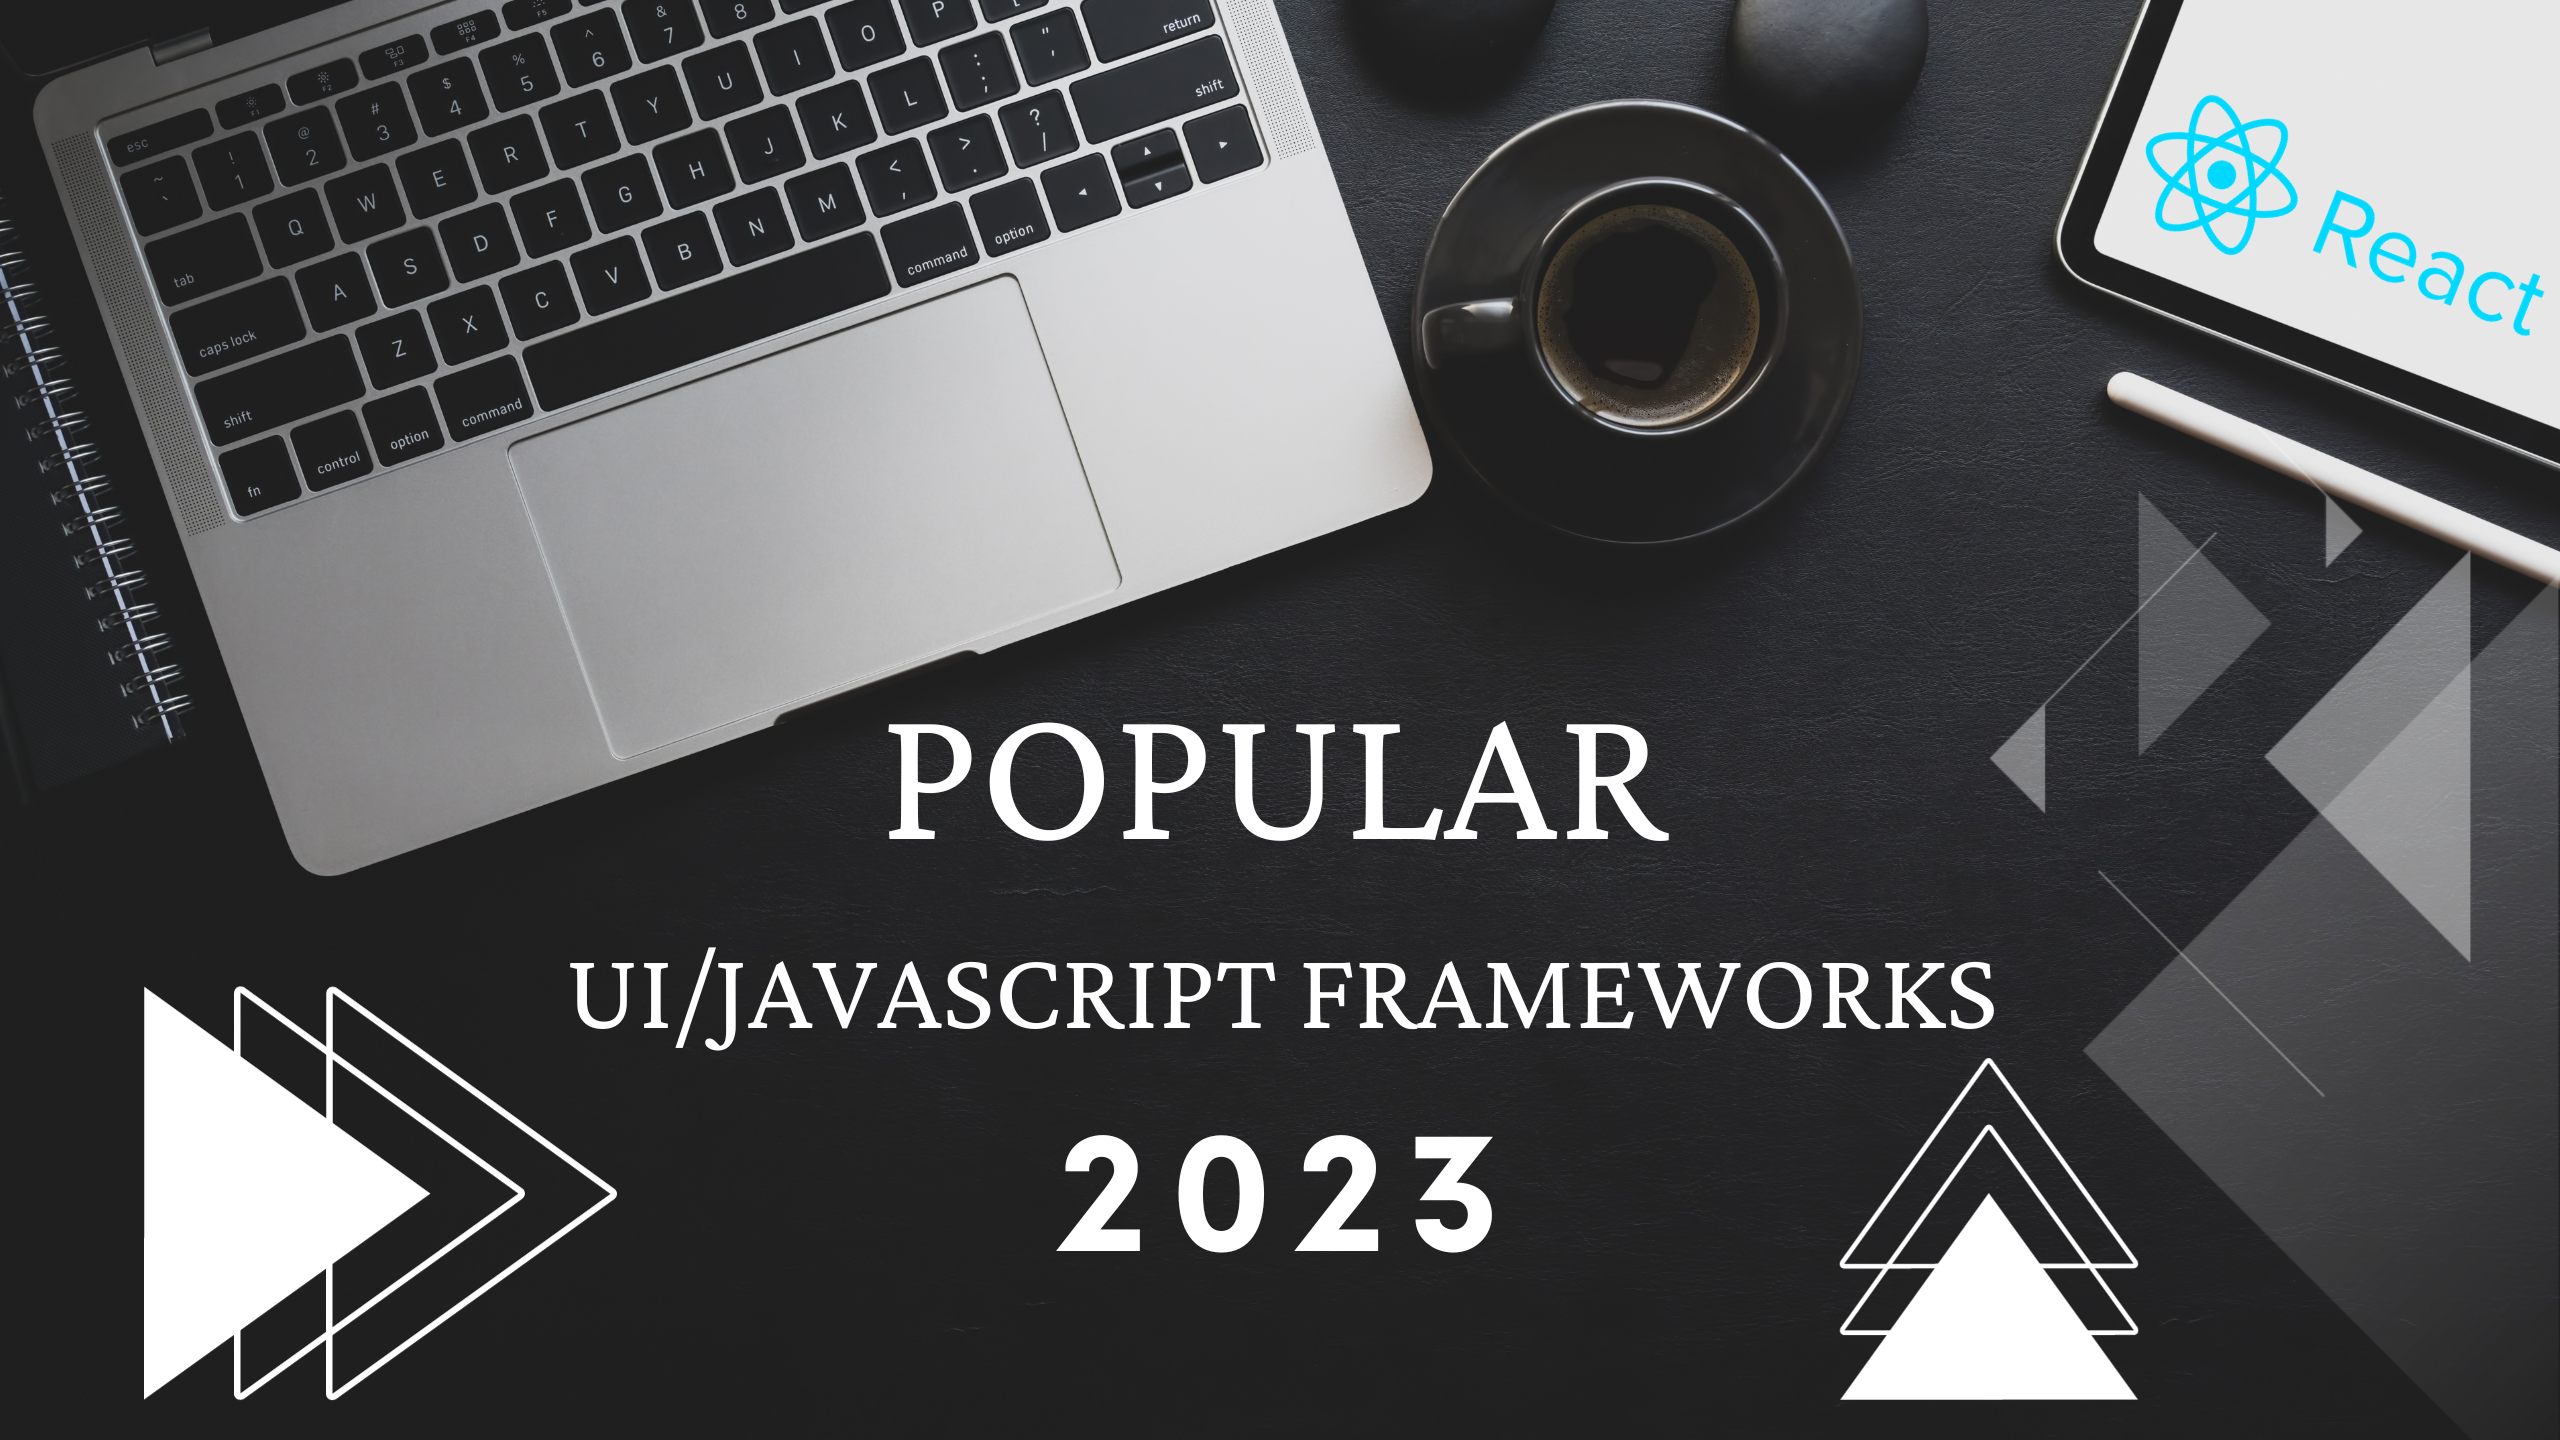 Ranking-The-Most-Popular-UI-and-JavaScript-Frameworks-in-2023